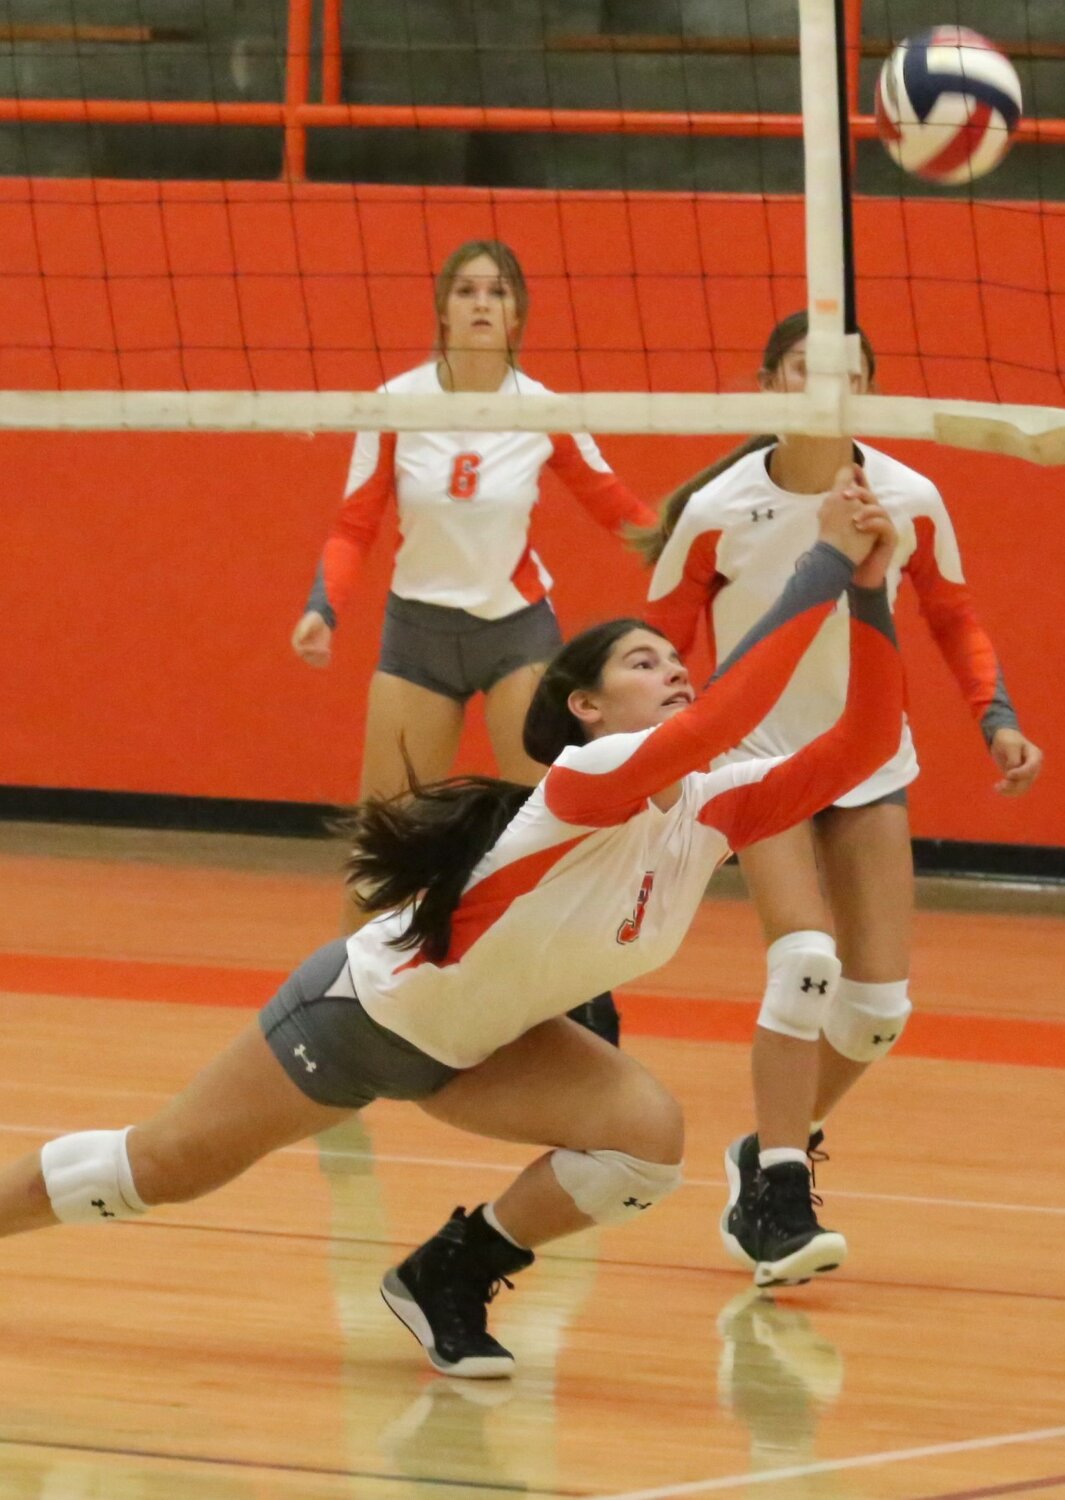 Mineola’s Mahayla McMahon extends to play a ball late in the match against Alba-Golden.